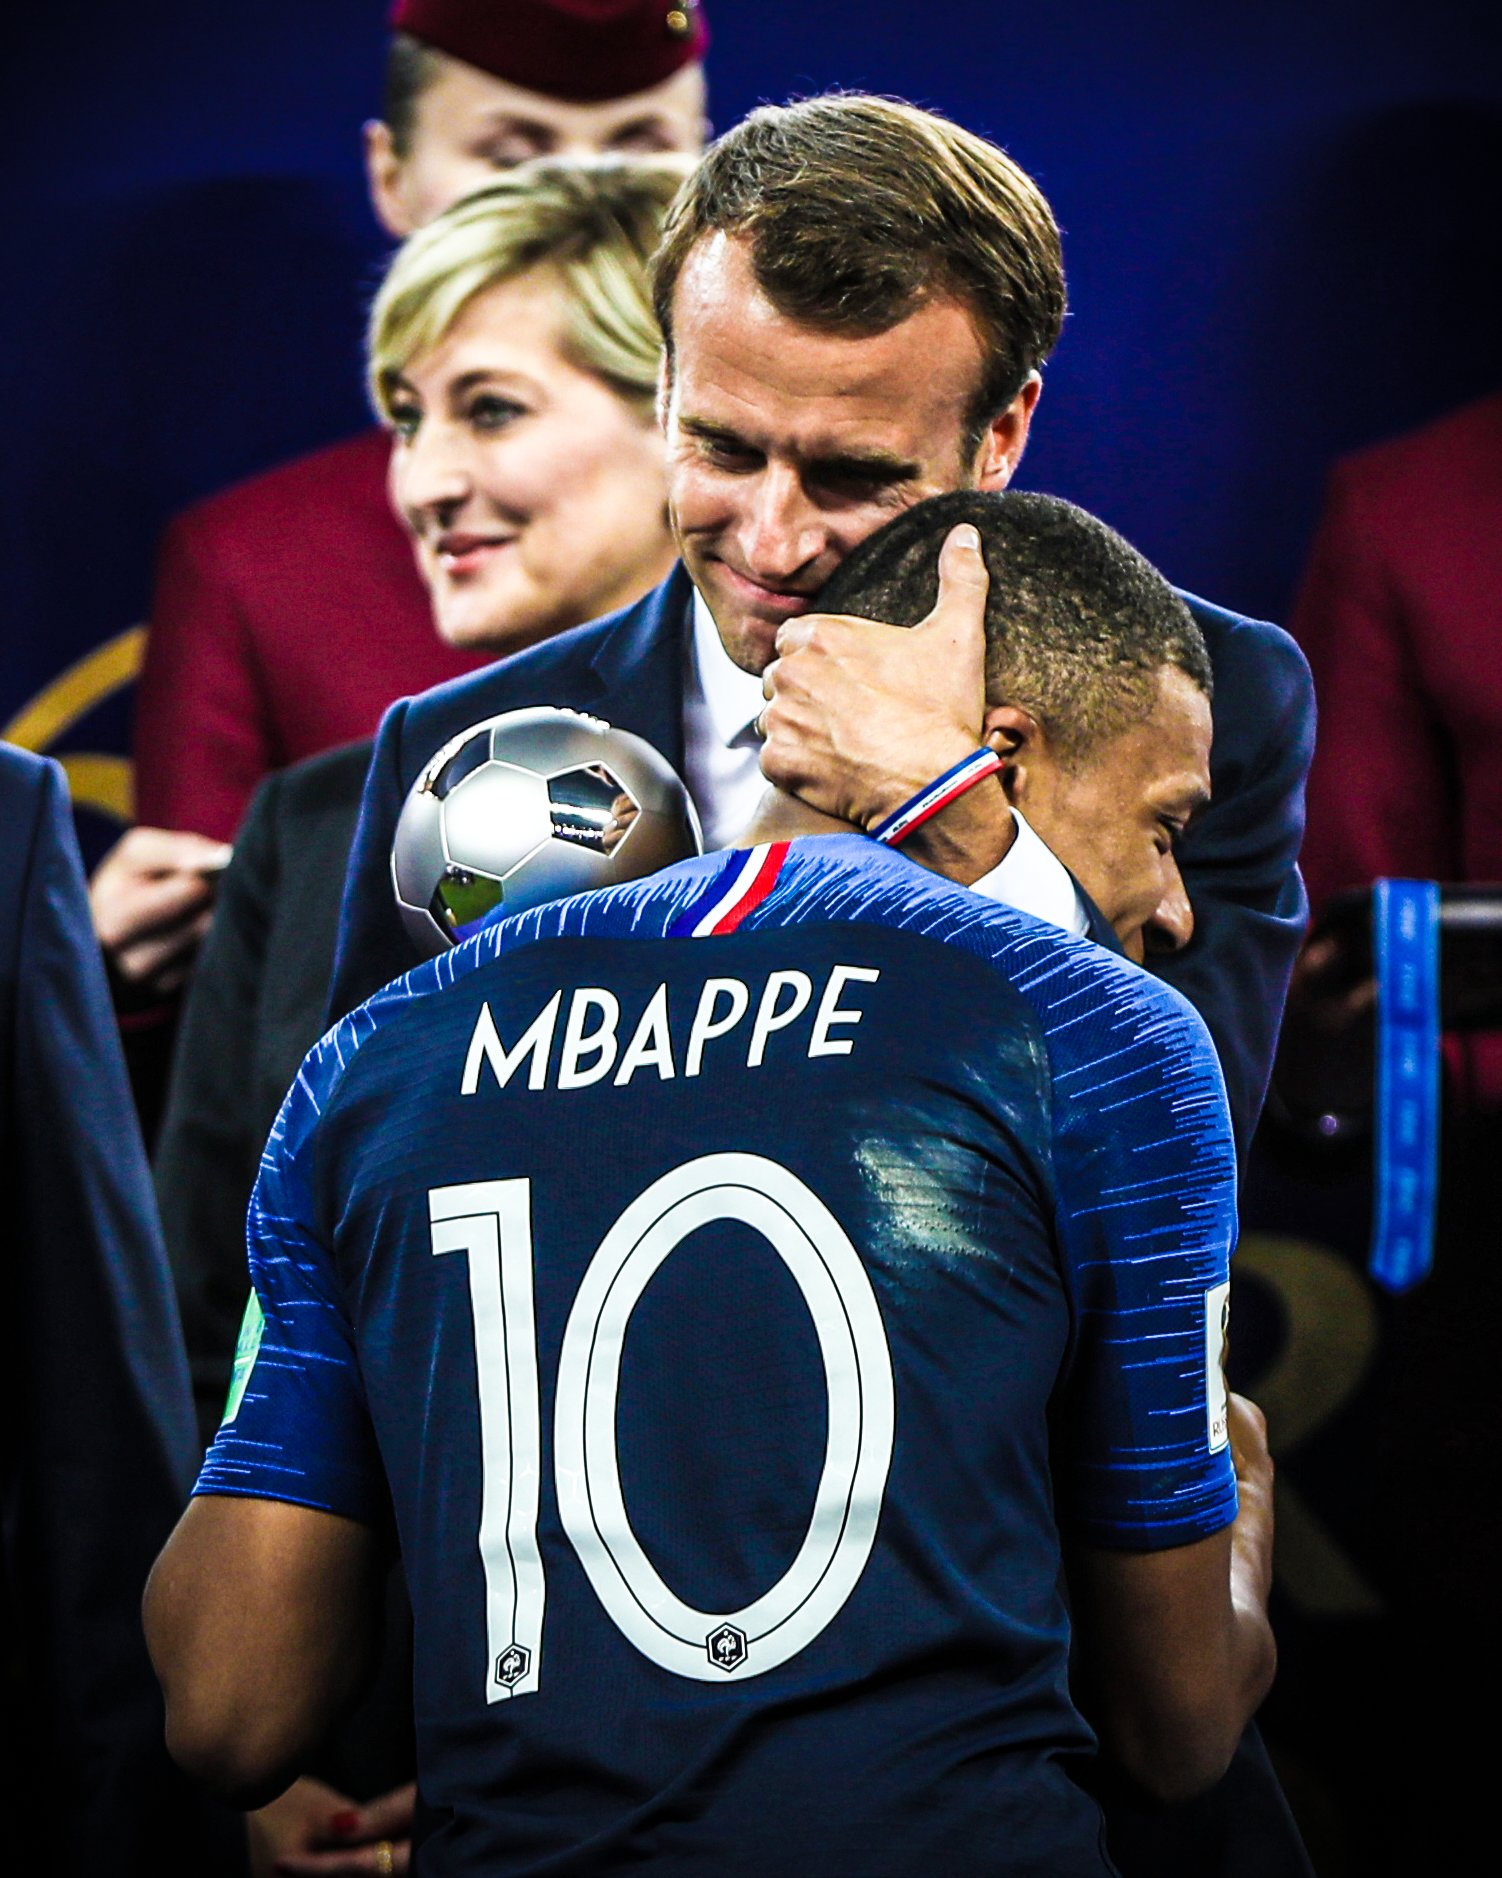 GOAL on Twitter: "French president Emmanuel Macron called Kylian Mbappe  several times to convince him to stay at PSG and grow his legacy as an icon  in Paris 🇫🇷 https://t.co/L4kbQTg5v0" / Twitter